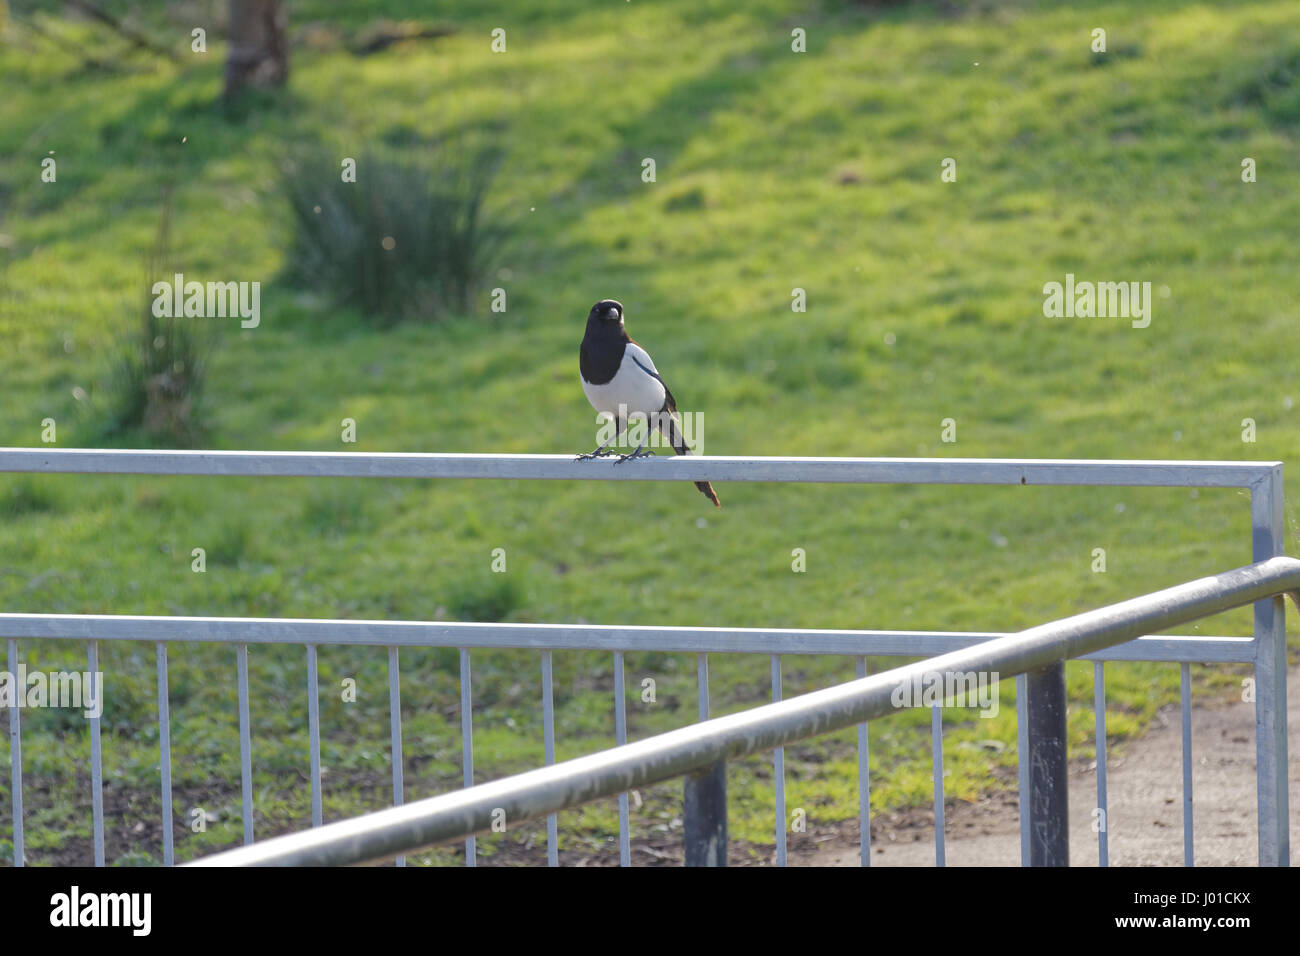 one single magpie for sorrow in urban environment railings or bars Stock Photo